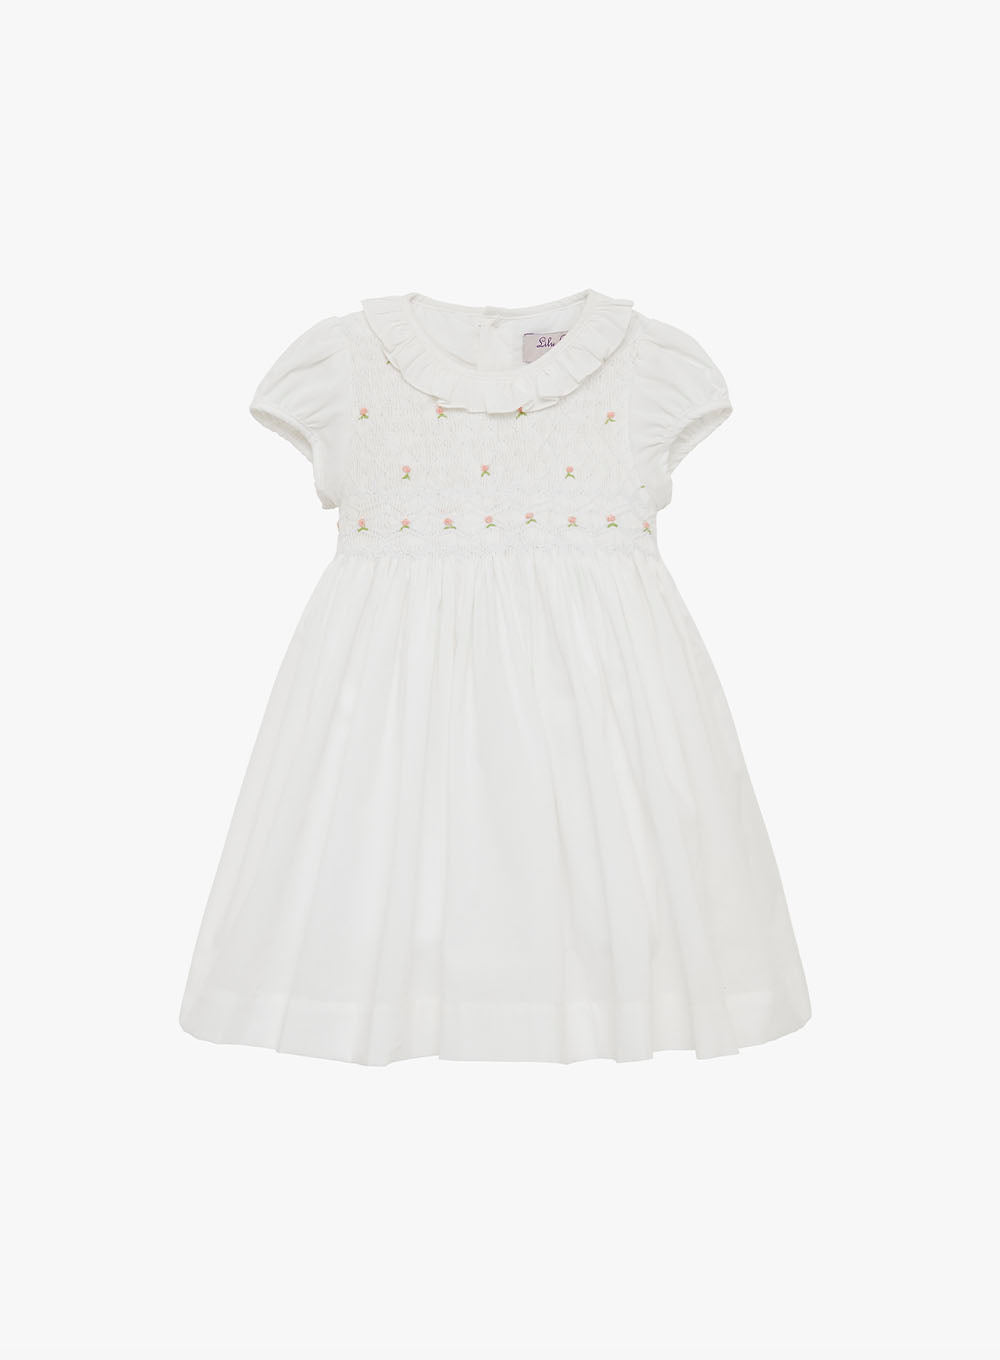 Baby Willow Rose Hand Smocked Dress in White